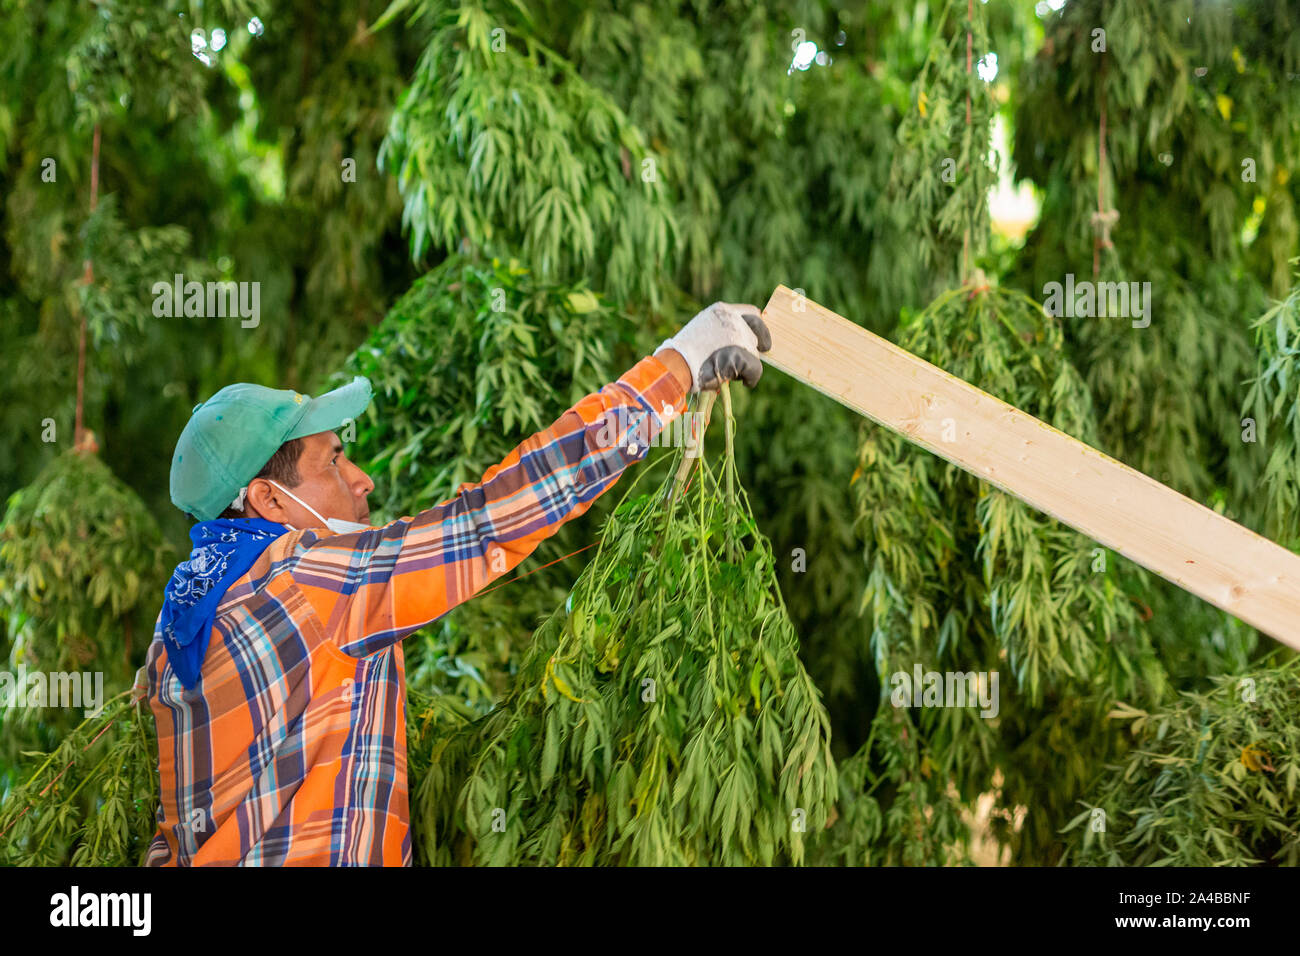 Paw Paw, Michigan - After harvesting hemp plants at the Paw Paw Hemp Company, workers hang the plants in a barn to dry. Many American farmers harveste Stock Photo